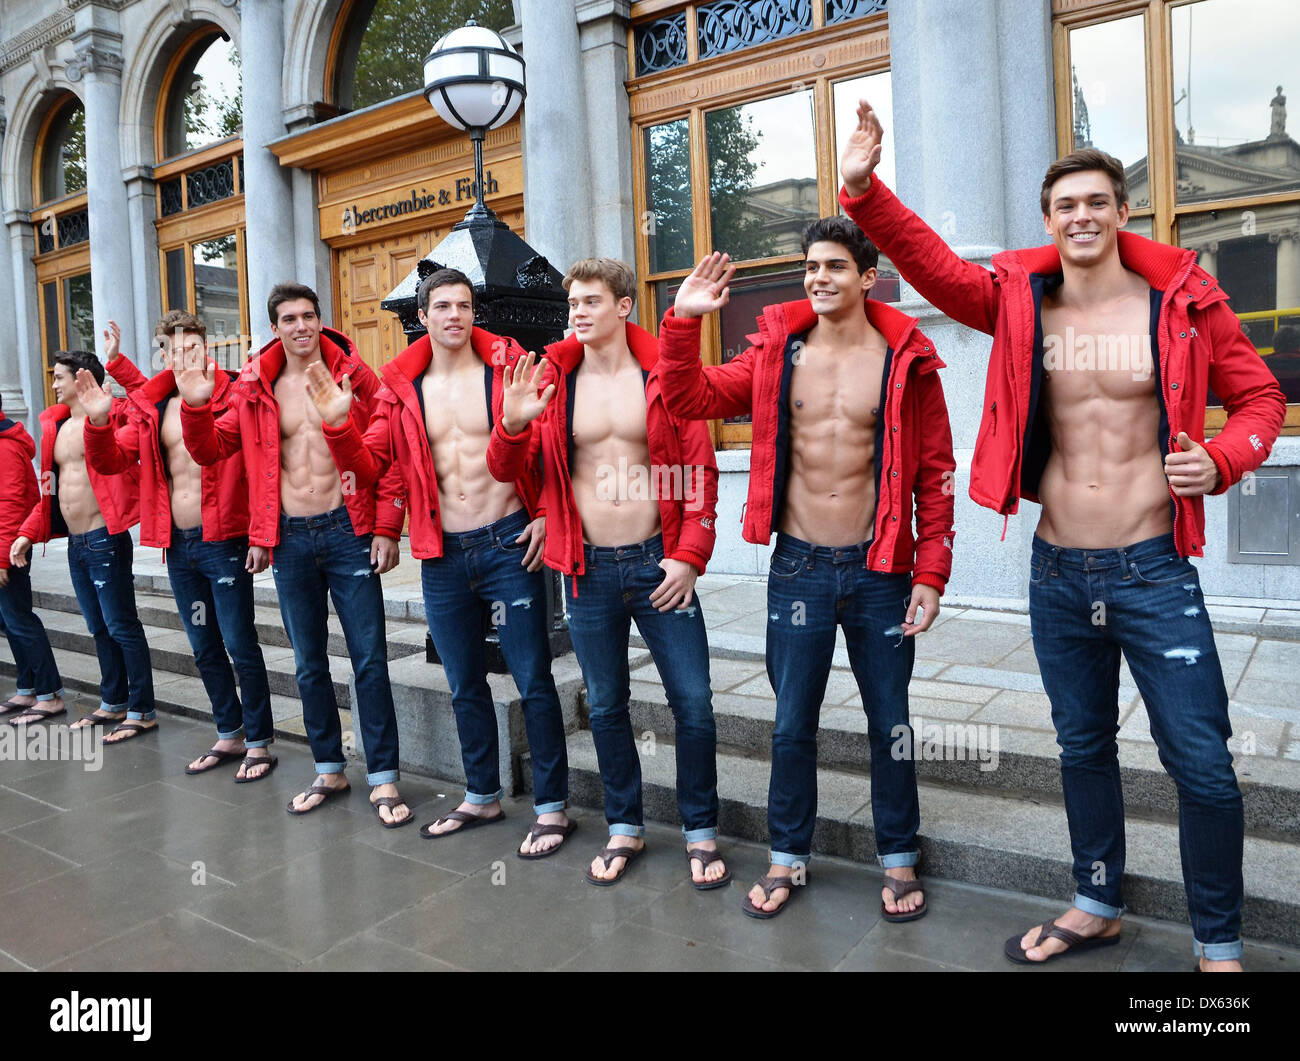 abercrombie and fitch about us